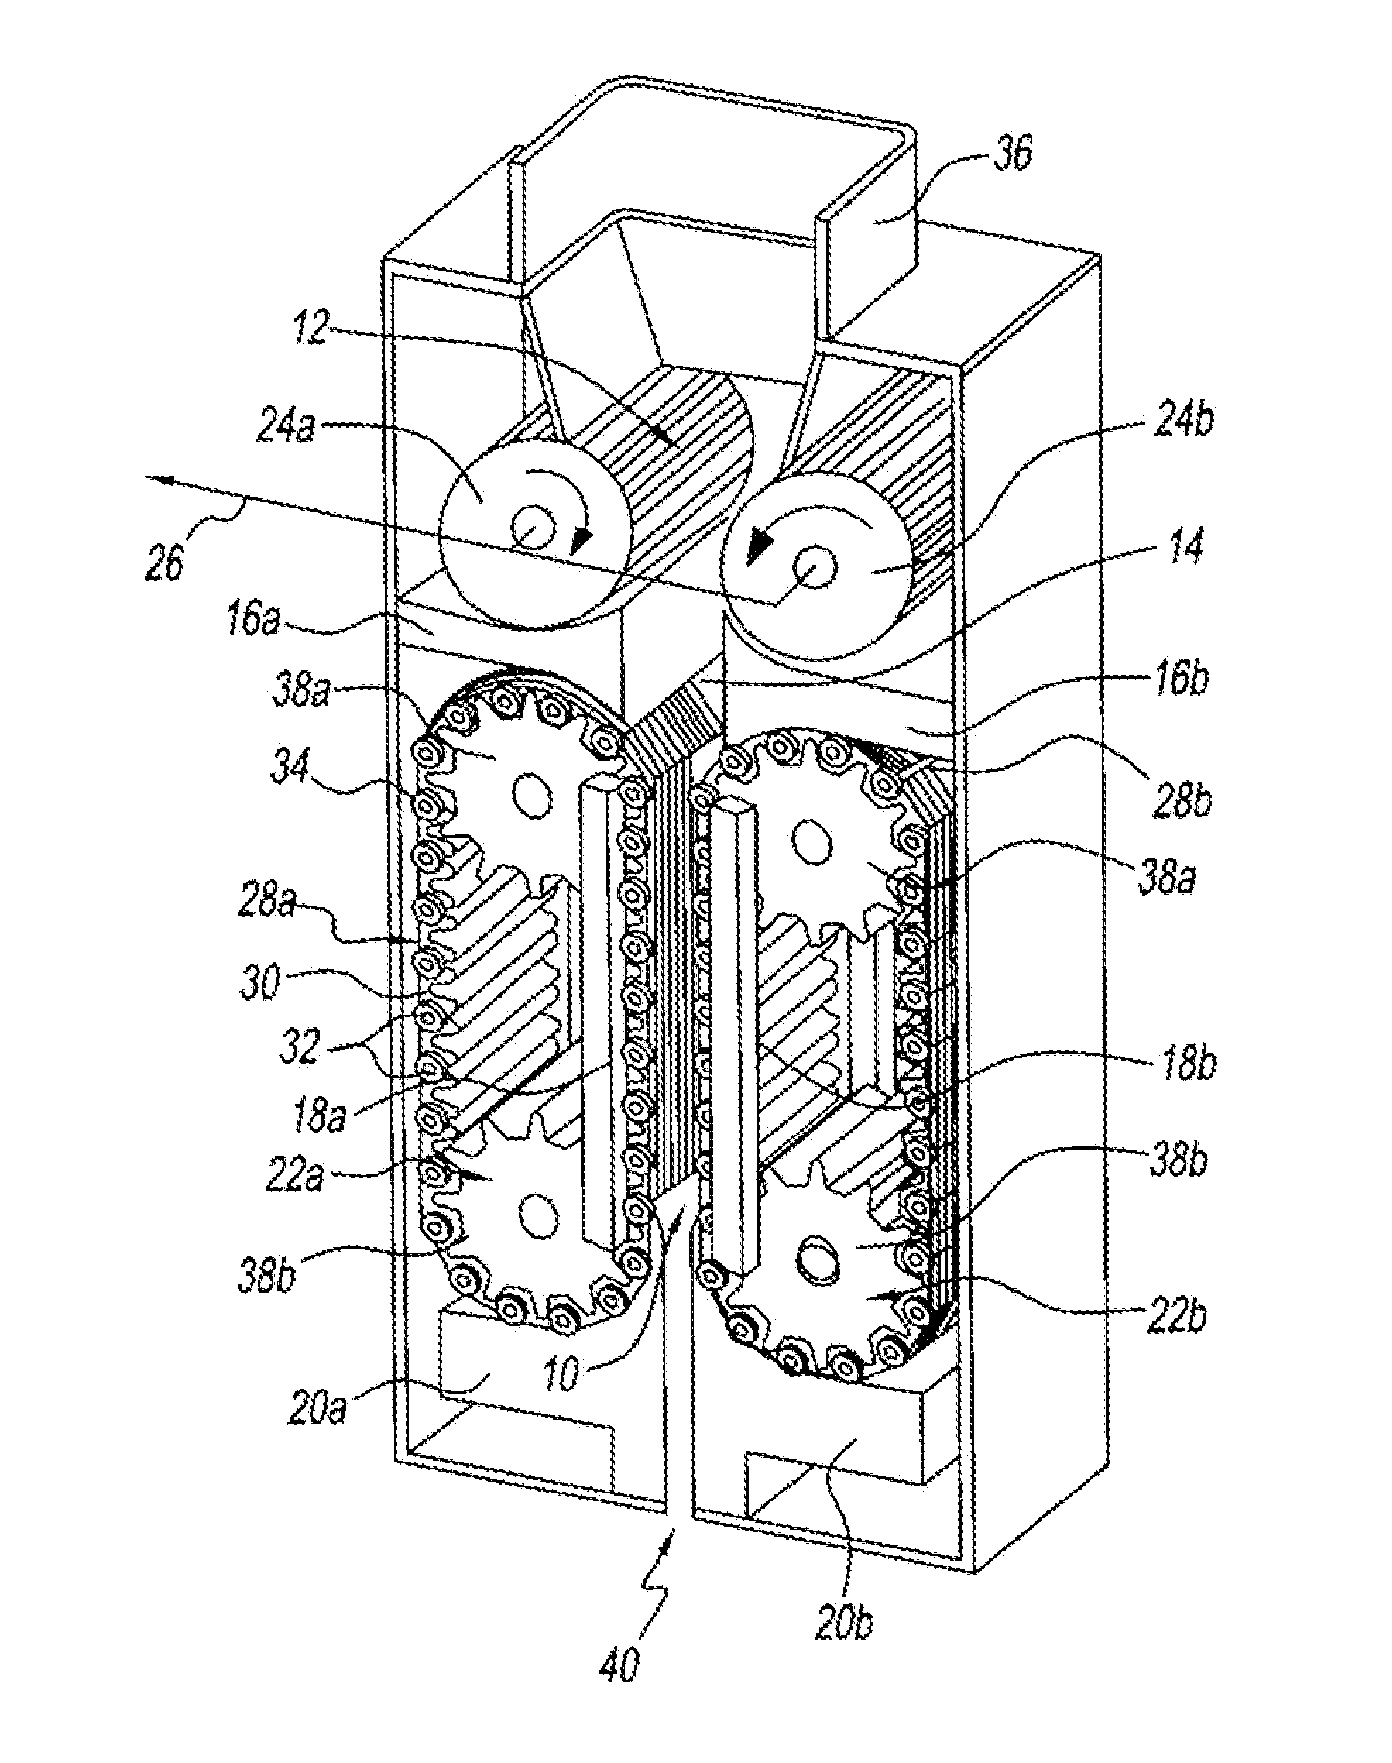 Active solids supply system and method for supplying solids